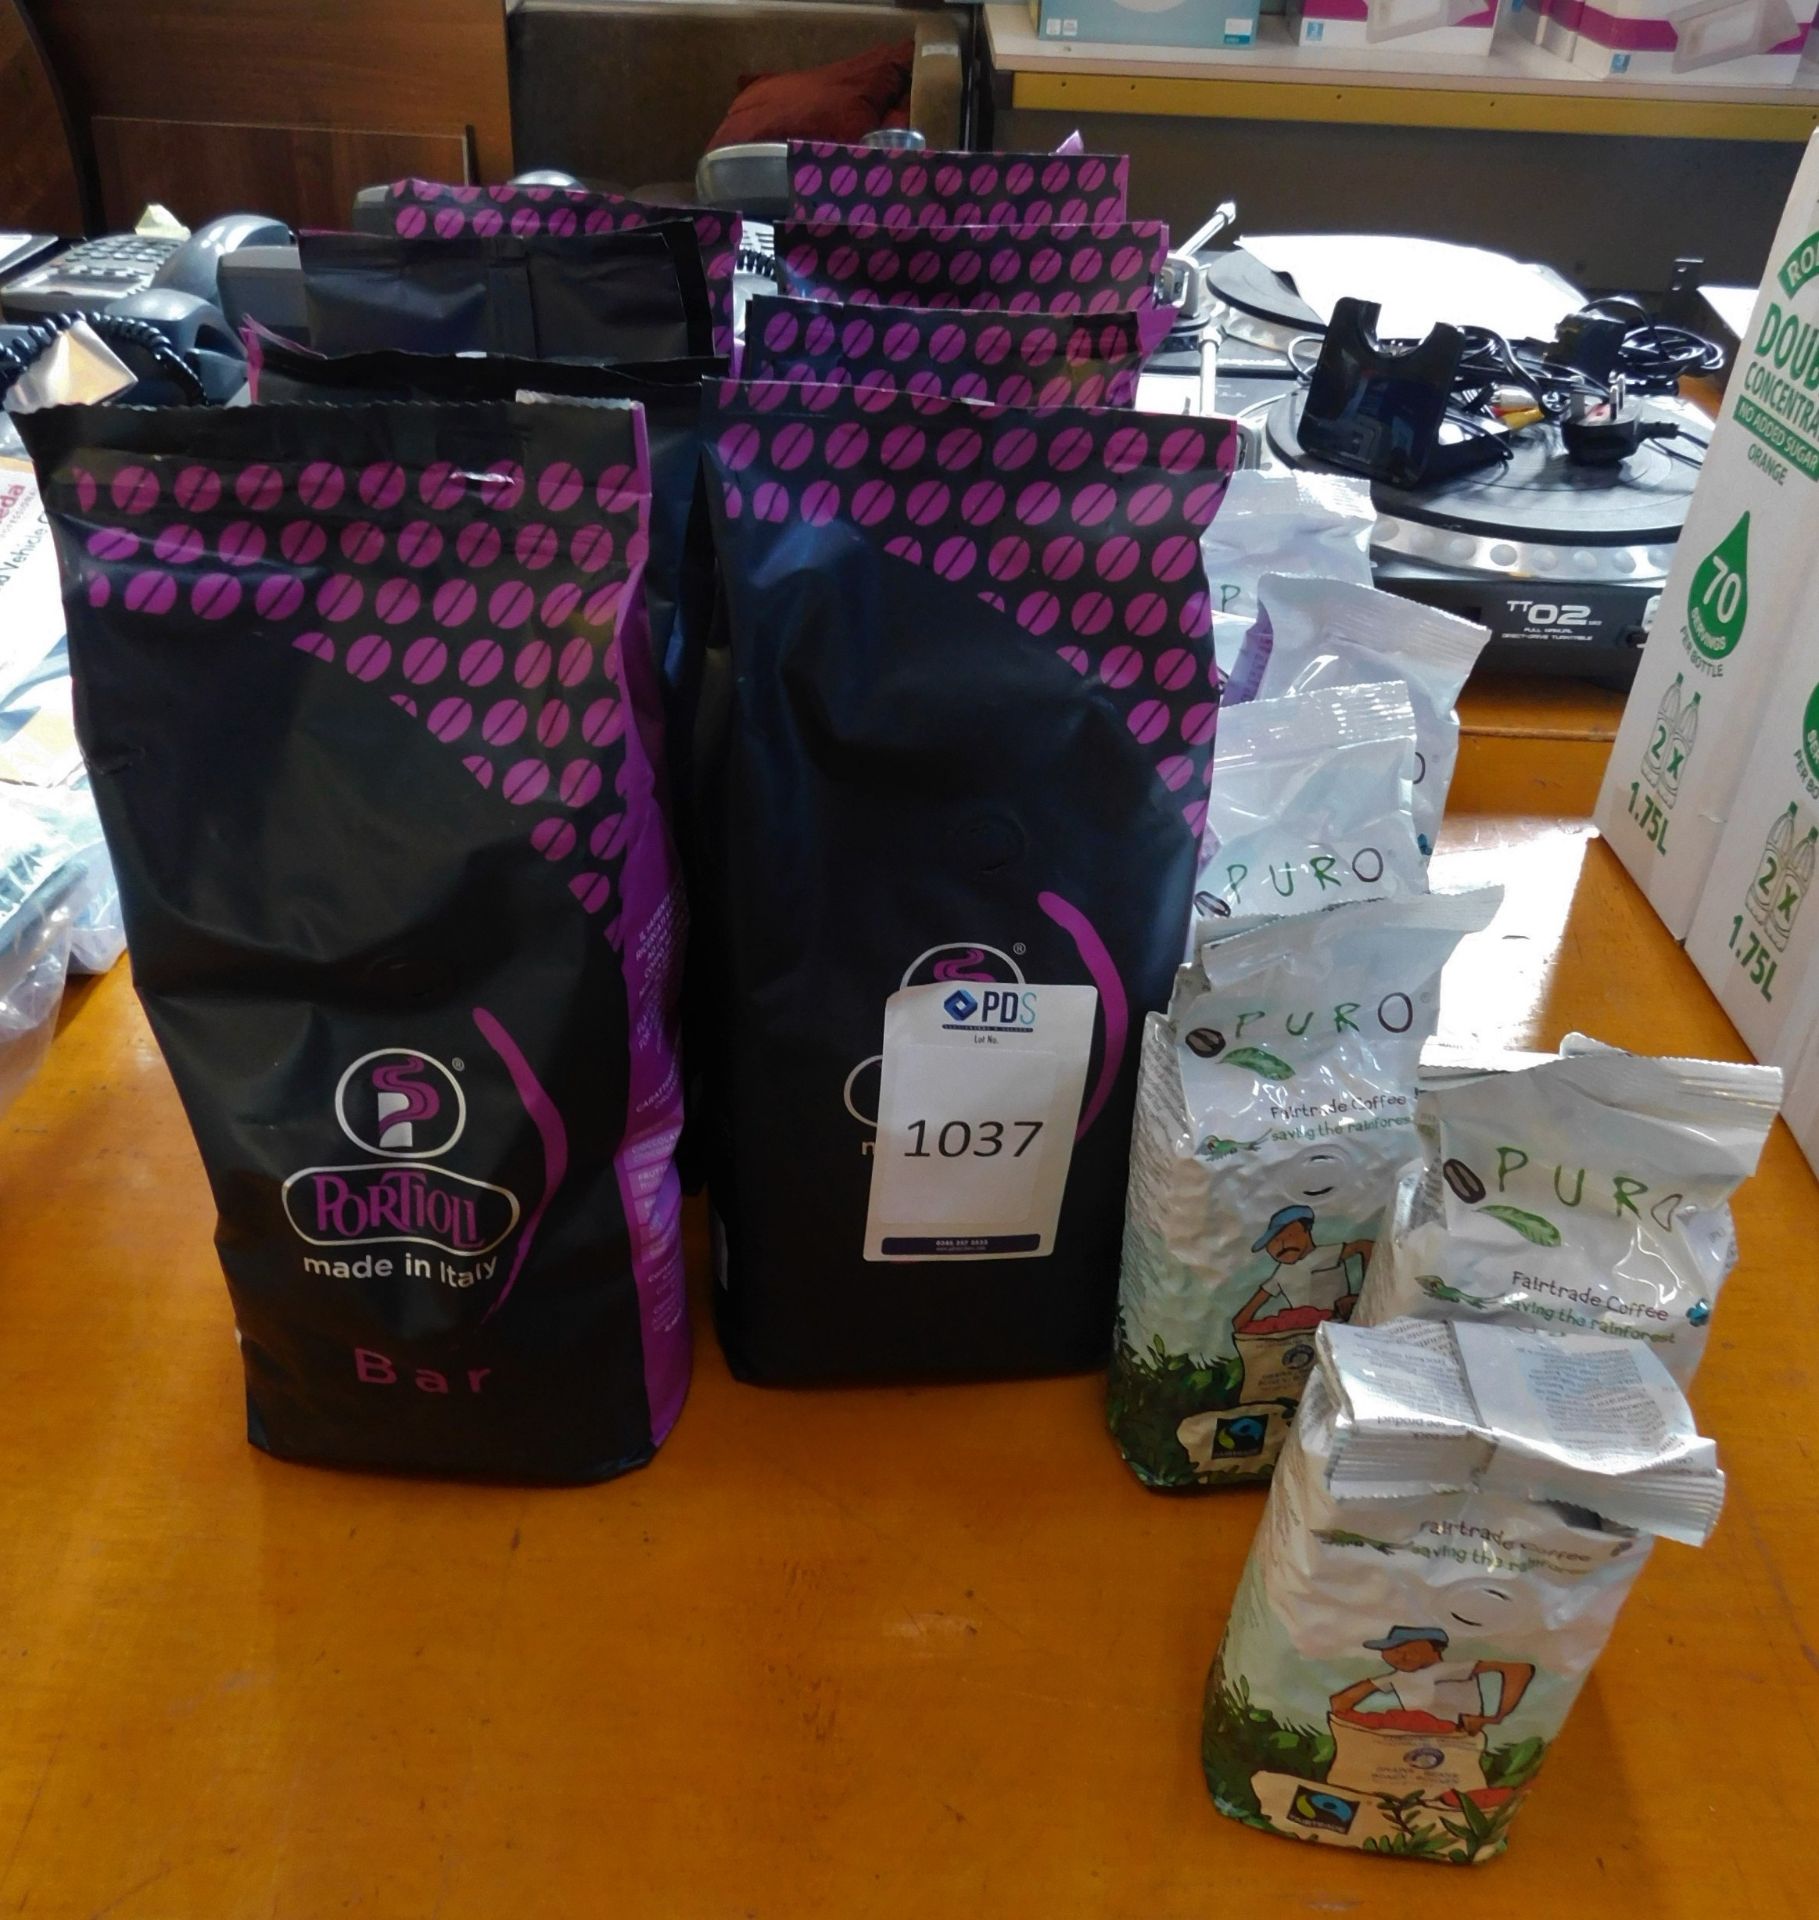 8 Packets of Portioli Coffee Beans (June 2021) and 8 Puro Fair Trade Coffee (No VAT on Hammer) (